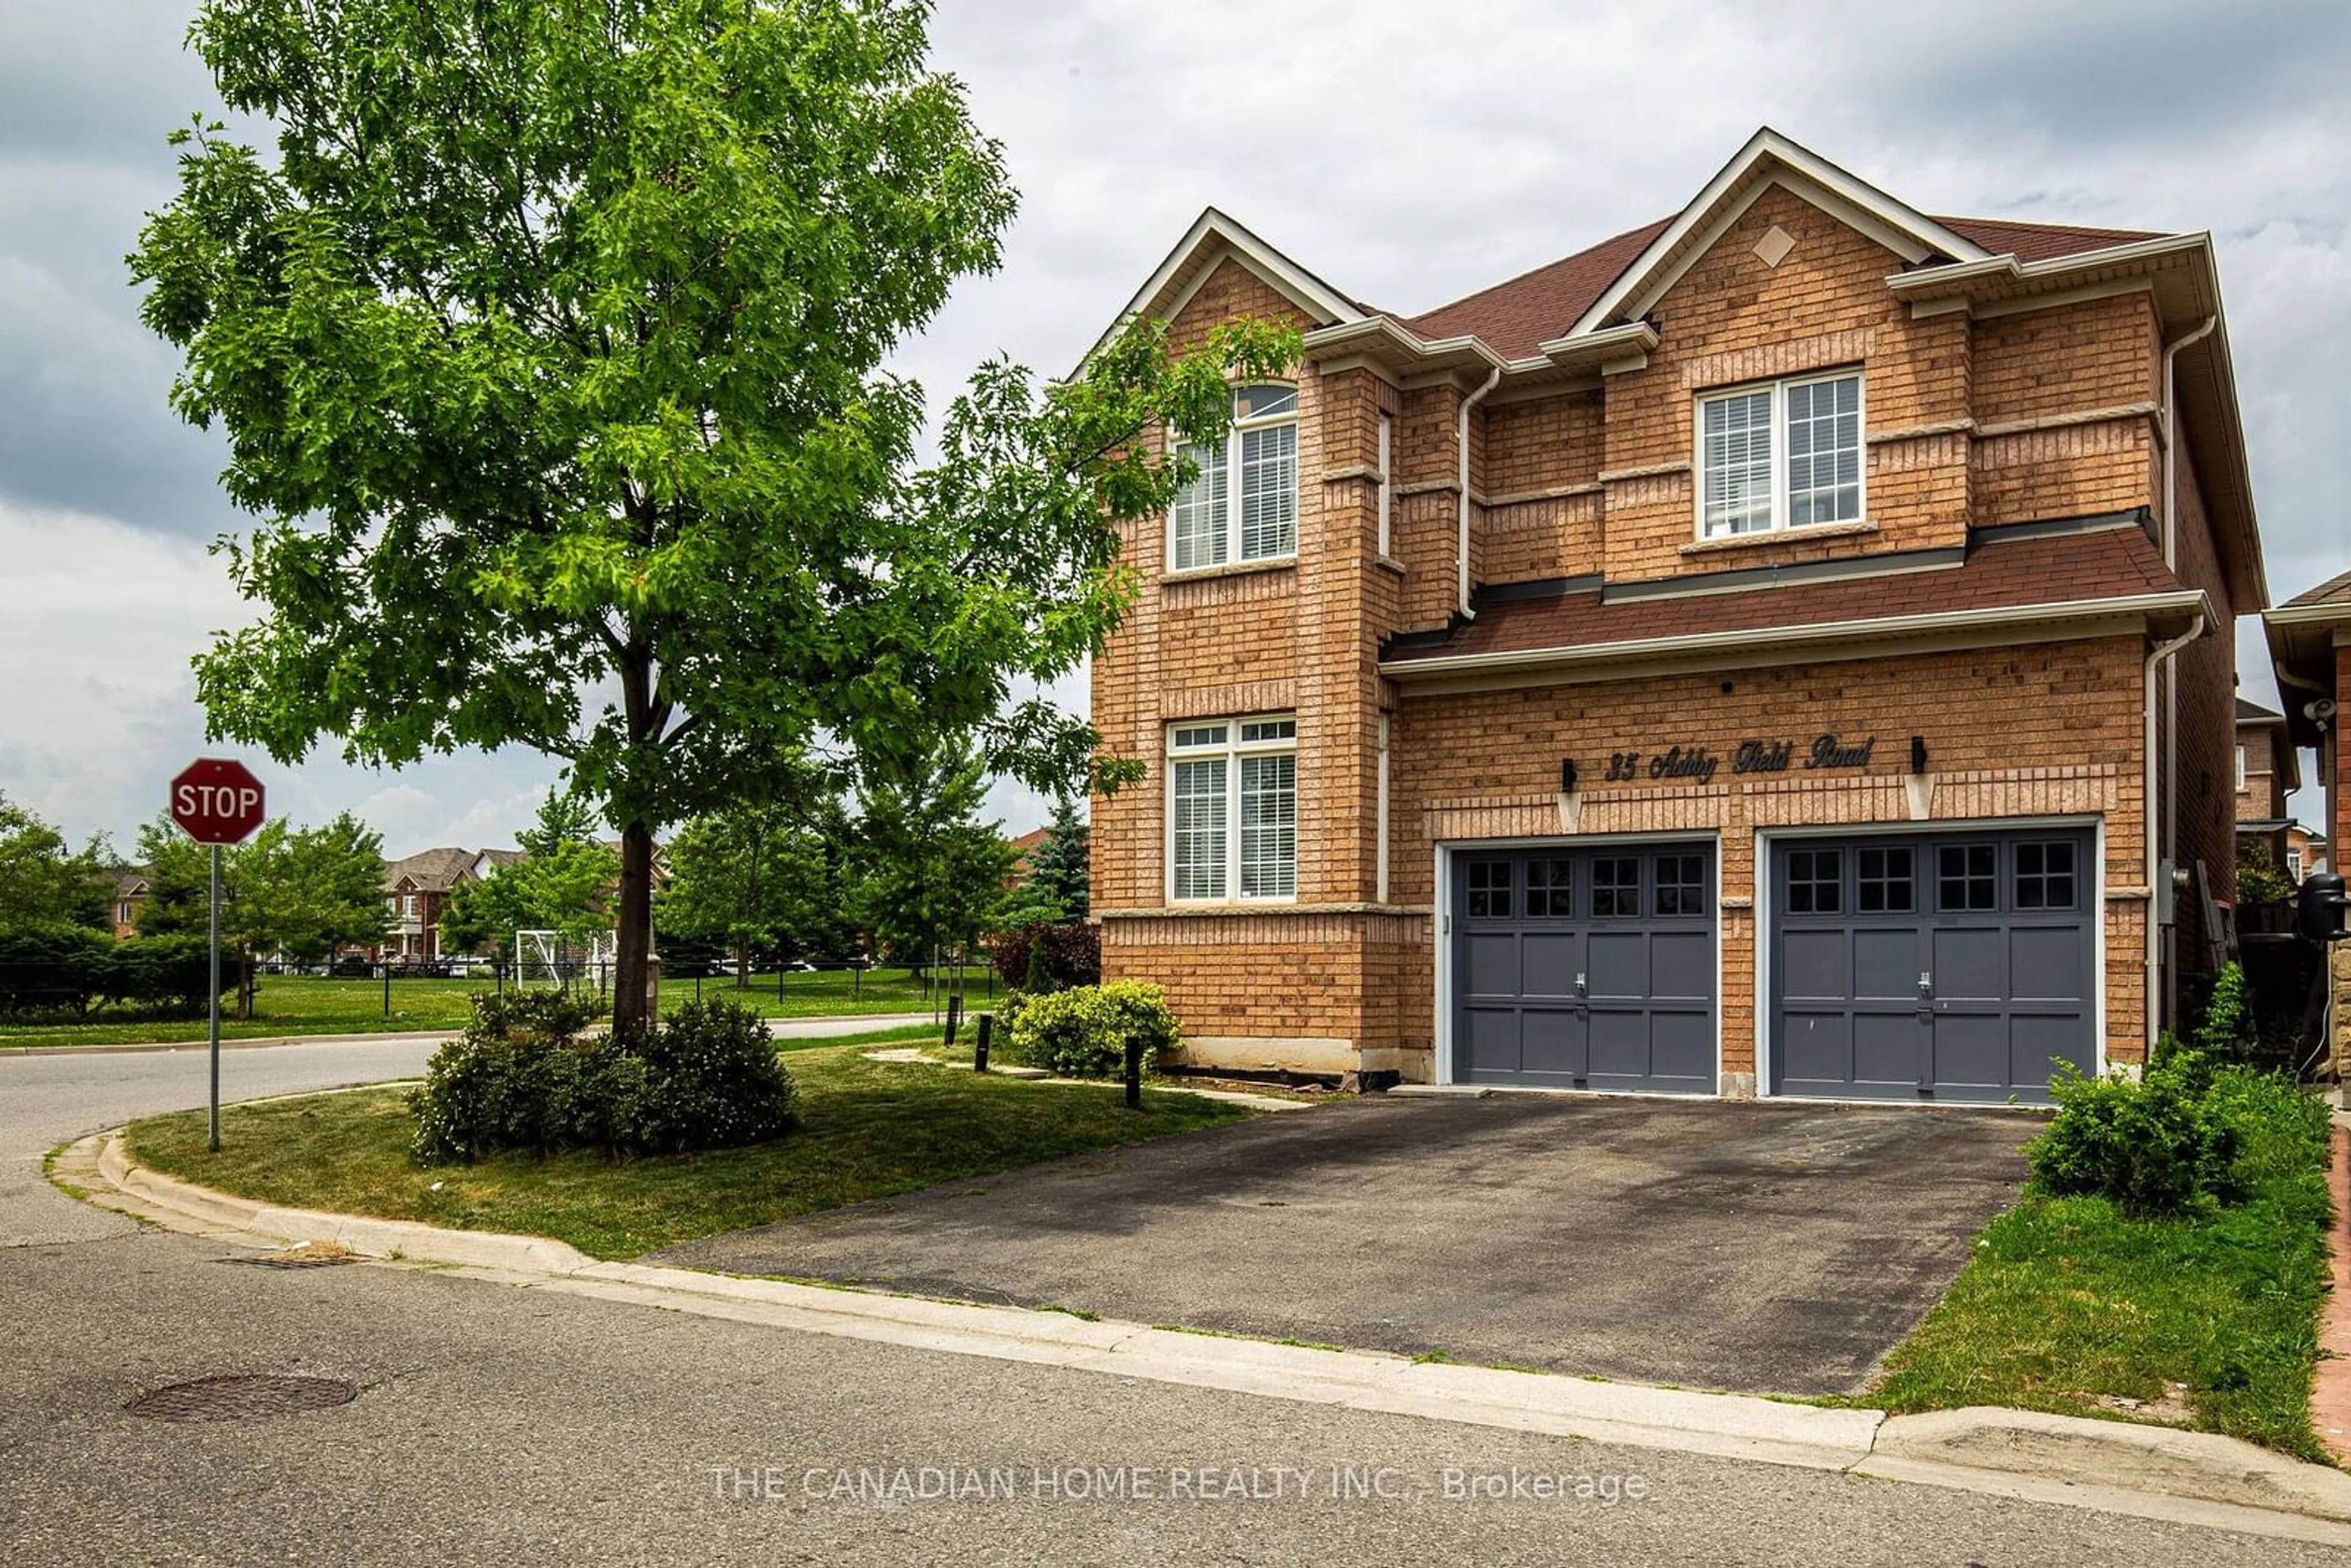 Home with brick exterior material for 35 Ashby Field Rd, Brampton Ontario L6X 0R5